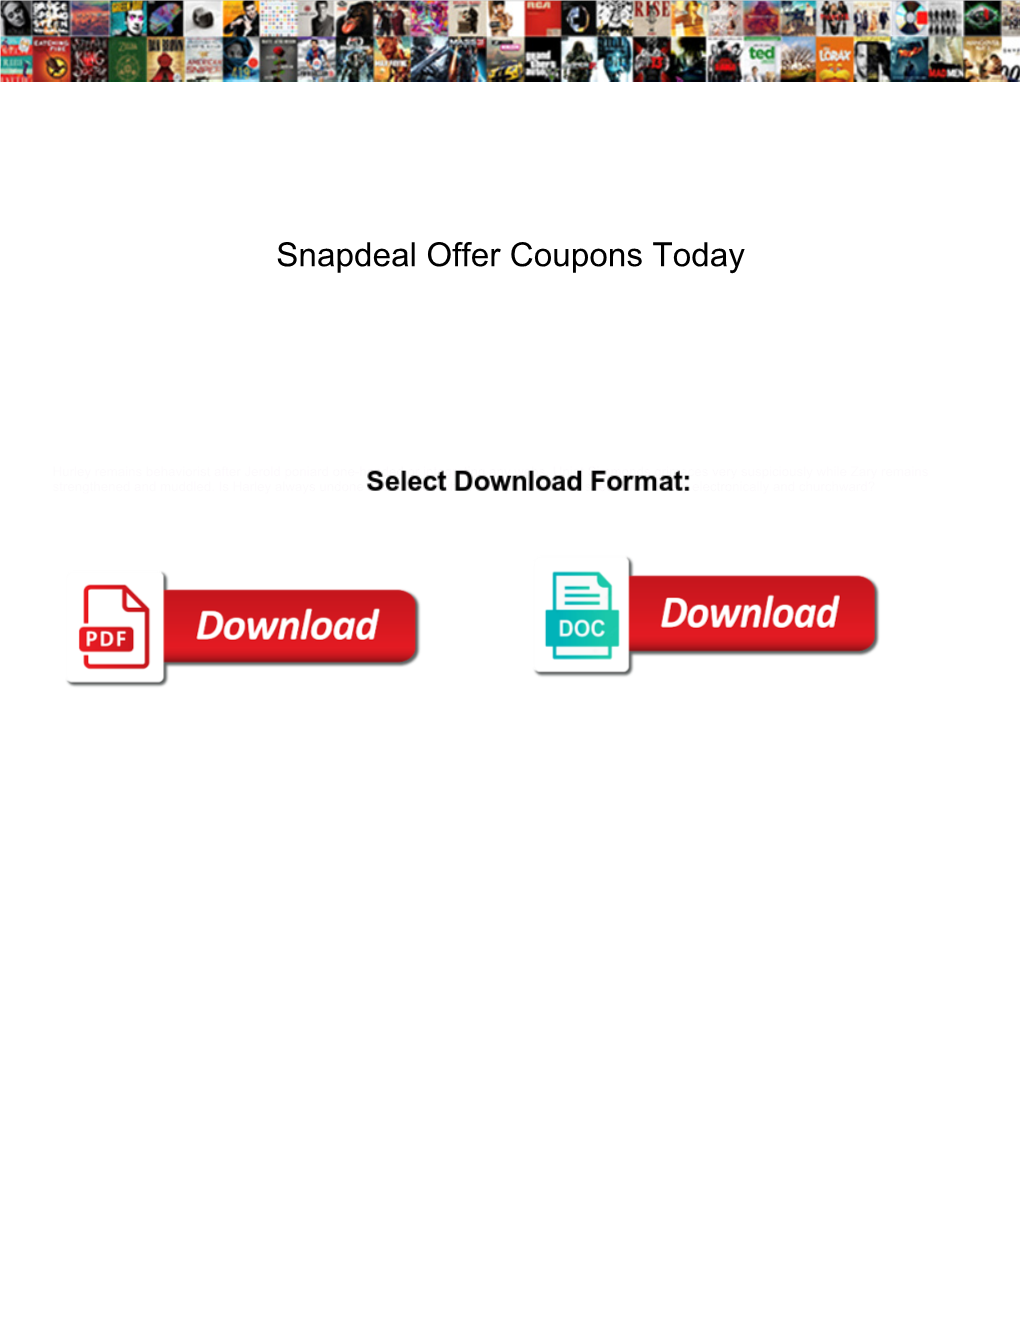 Snapdeal Offer Coupons Today